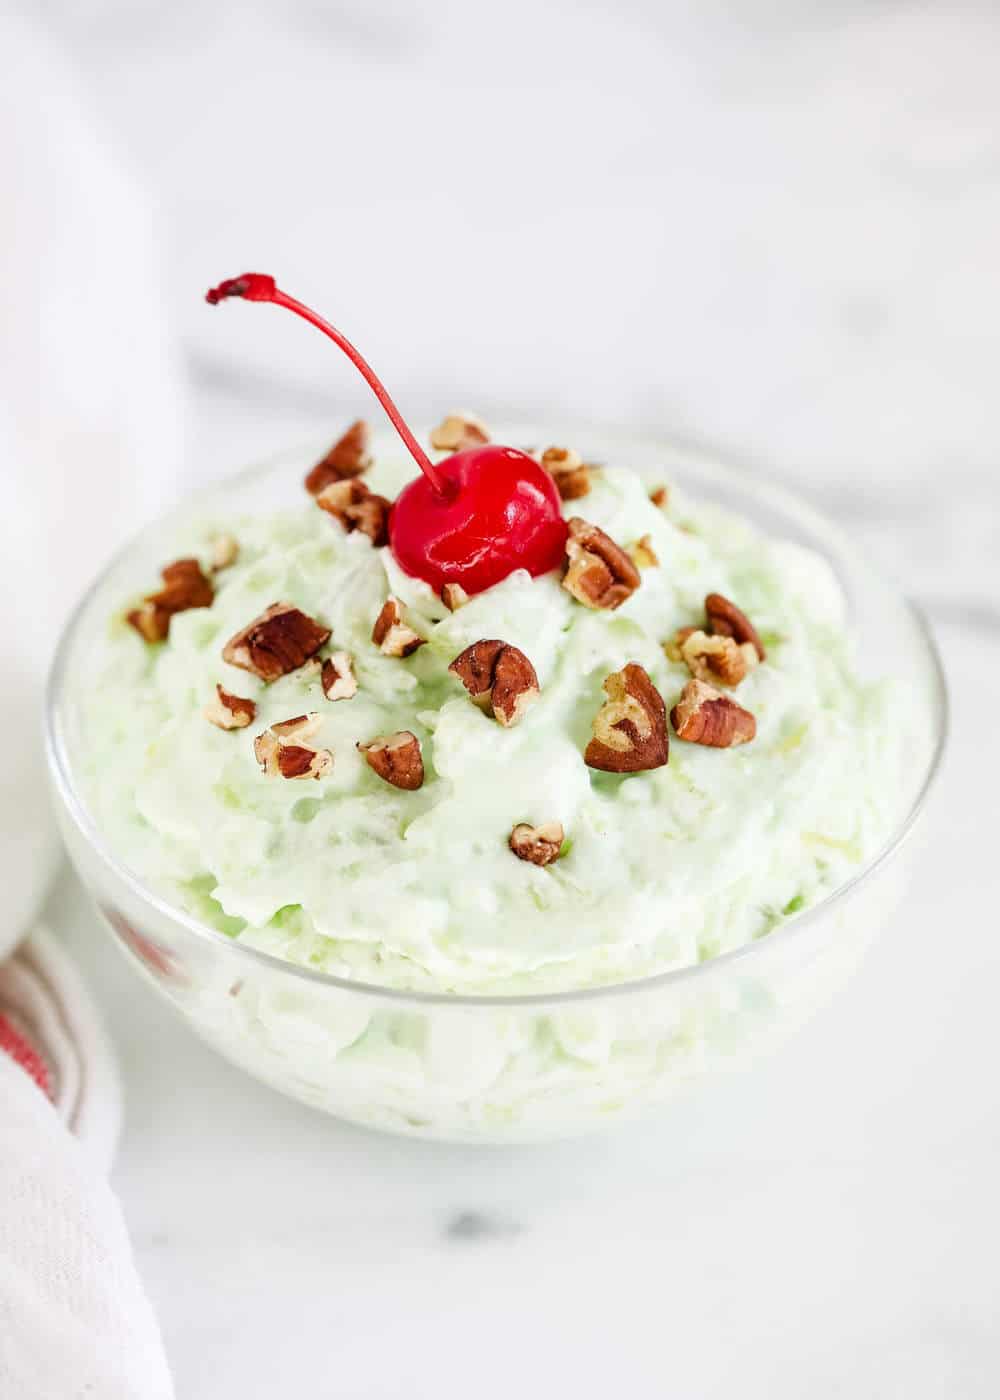 Pistachio pudding salad in a glass bowl with a cherry on top.